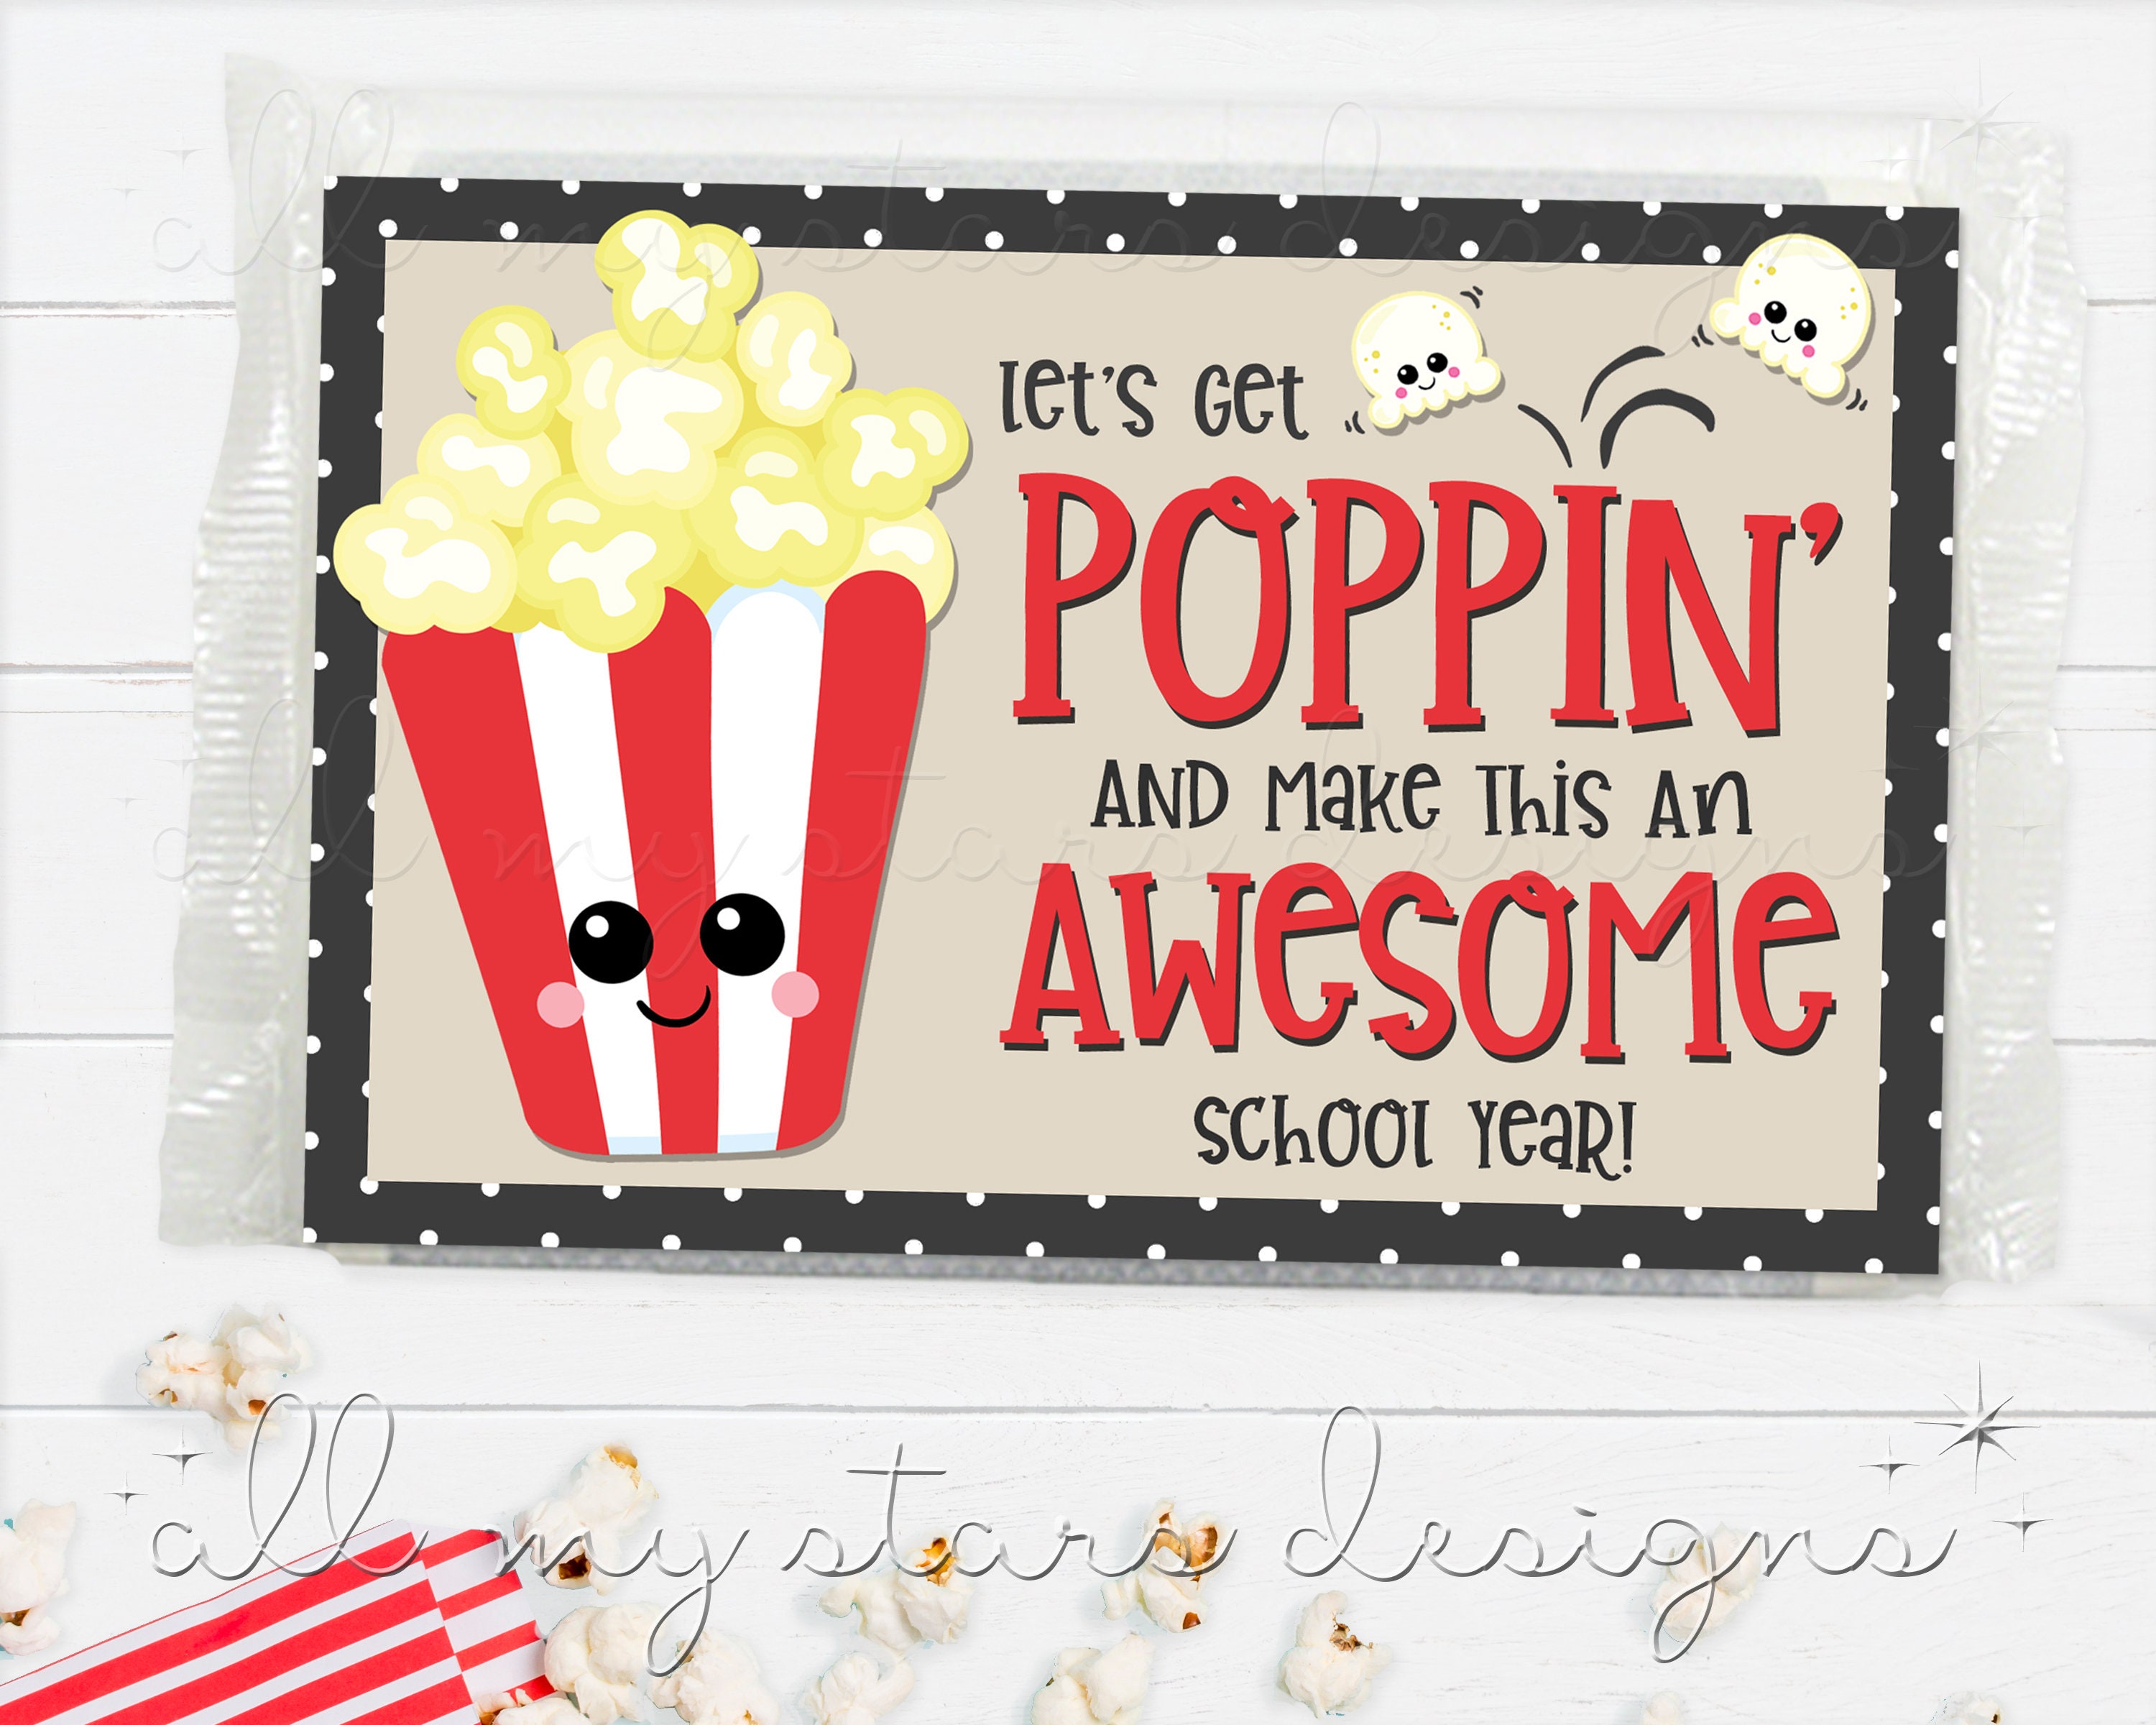 Let's get this party Poppin' Birthday Favor Bags - SALTED Design Studio